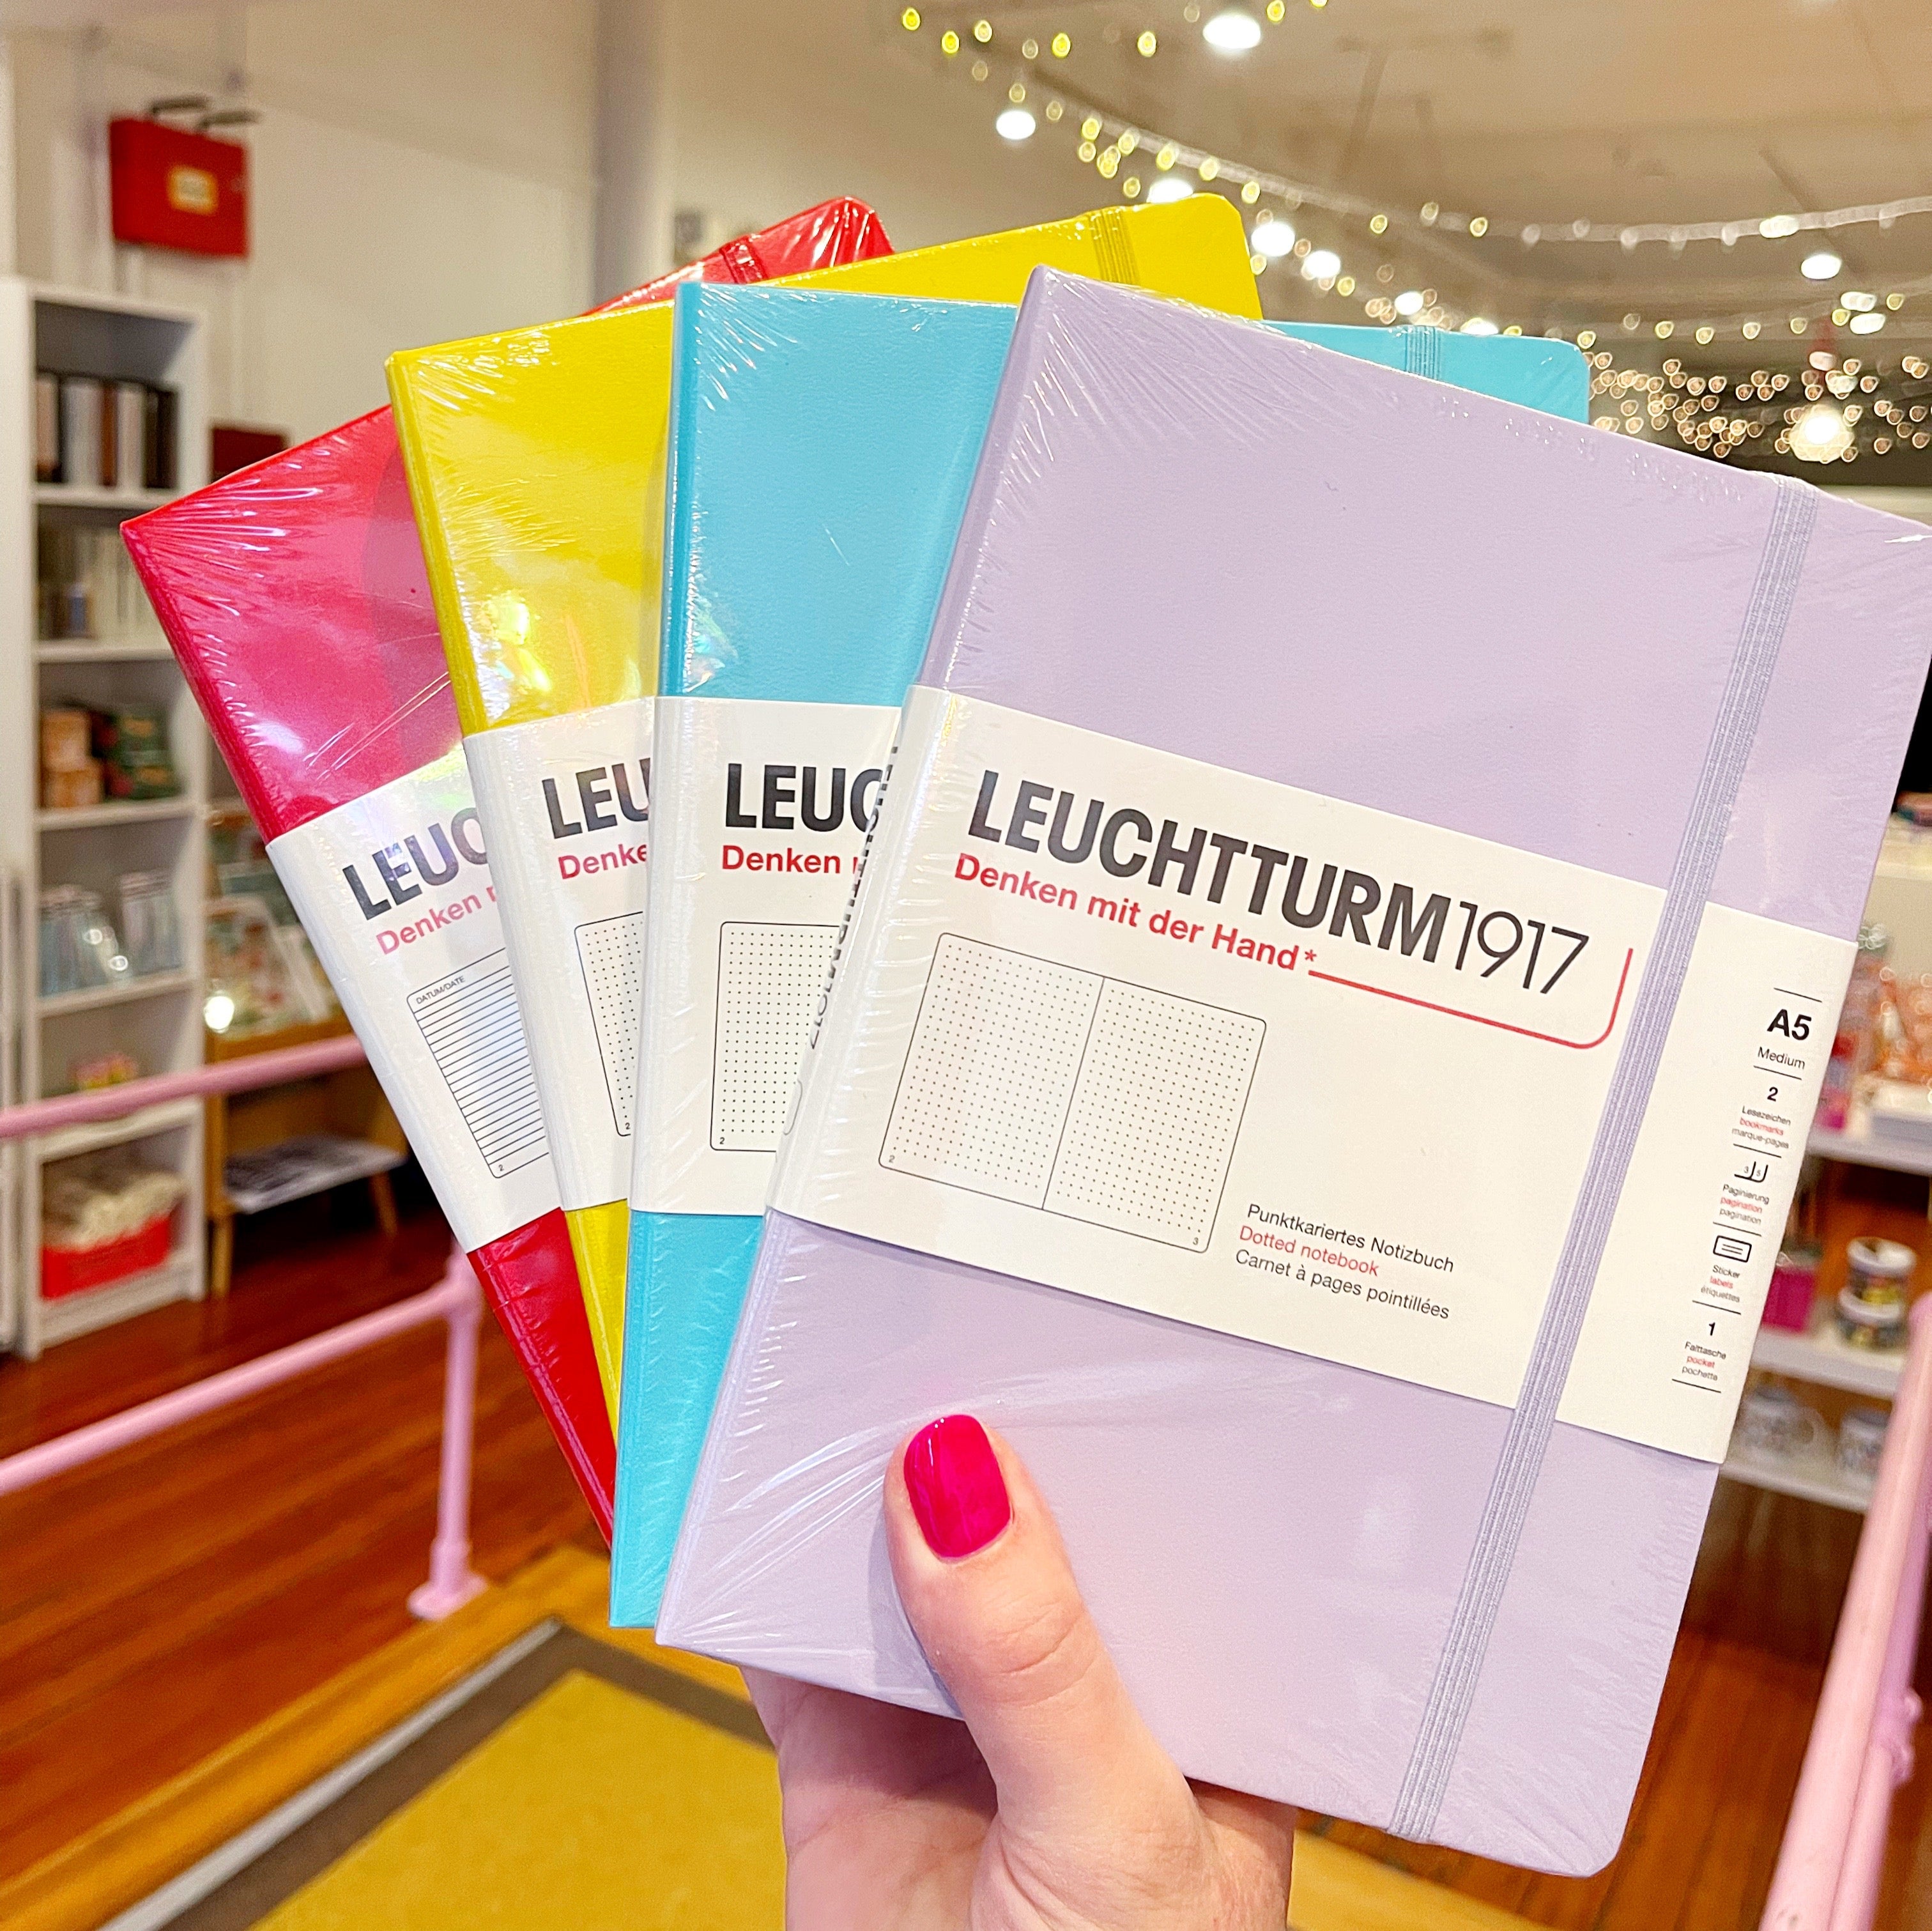 Leuchtturm1917 Medium Hard Cover Notebook, Muted Colours - Dotted Paper